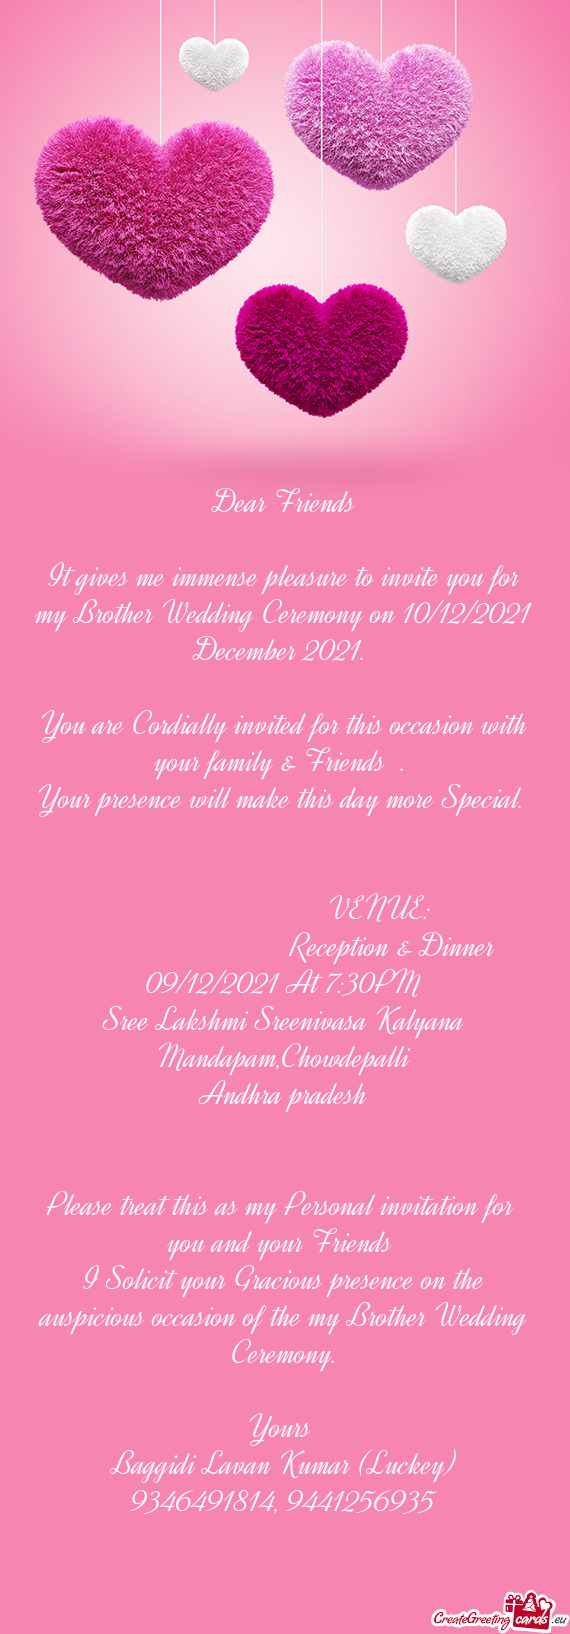 It gives me immense pleasure to invite you for my Brother Wedding Ceremony on 10/12/2021 December 20